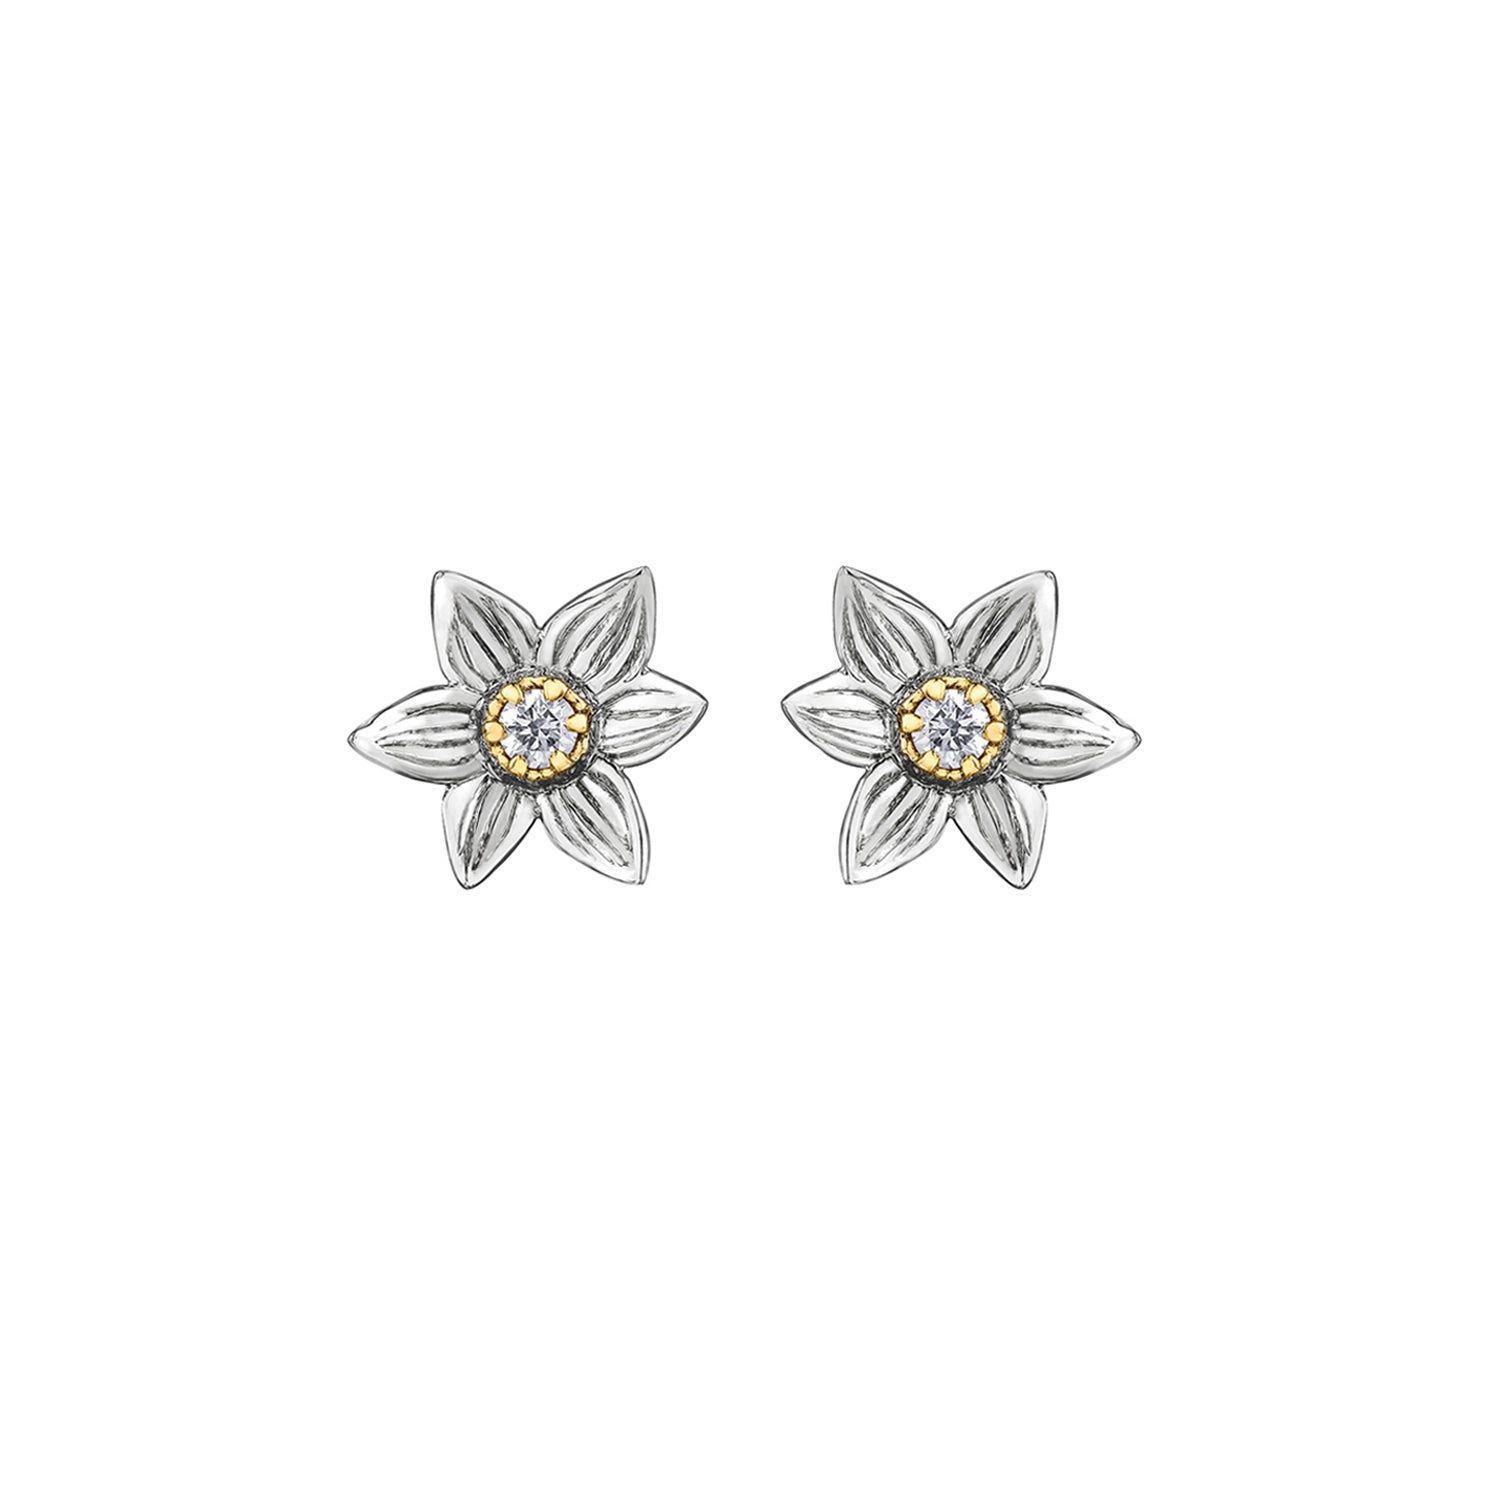 Crafted in 14KT white and yellow Certified Canadian Gold, these earrings feature Manitoba prairie crocus flowers set with round brilliant-cut Canadian diamonds